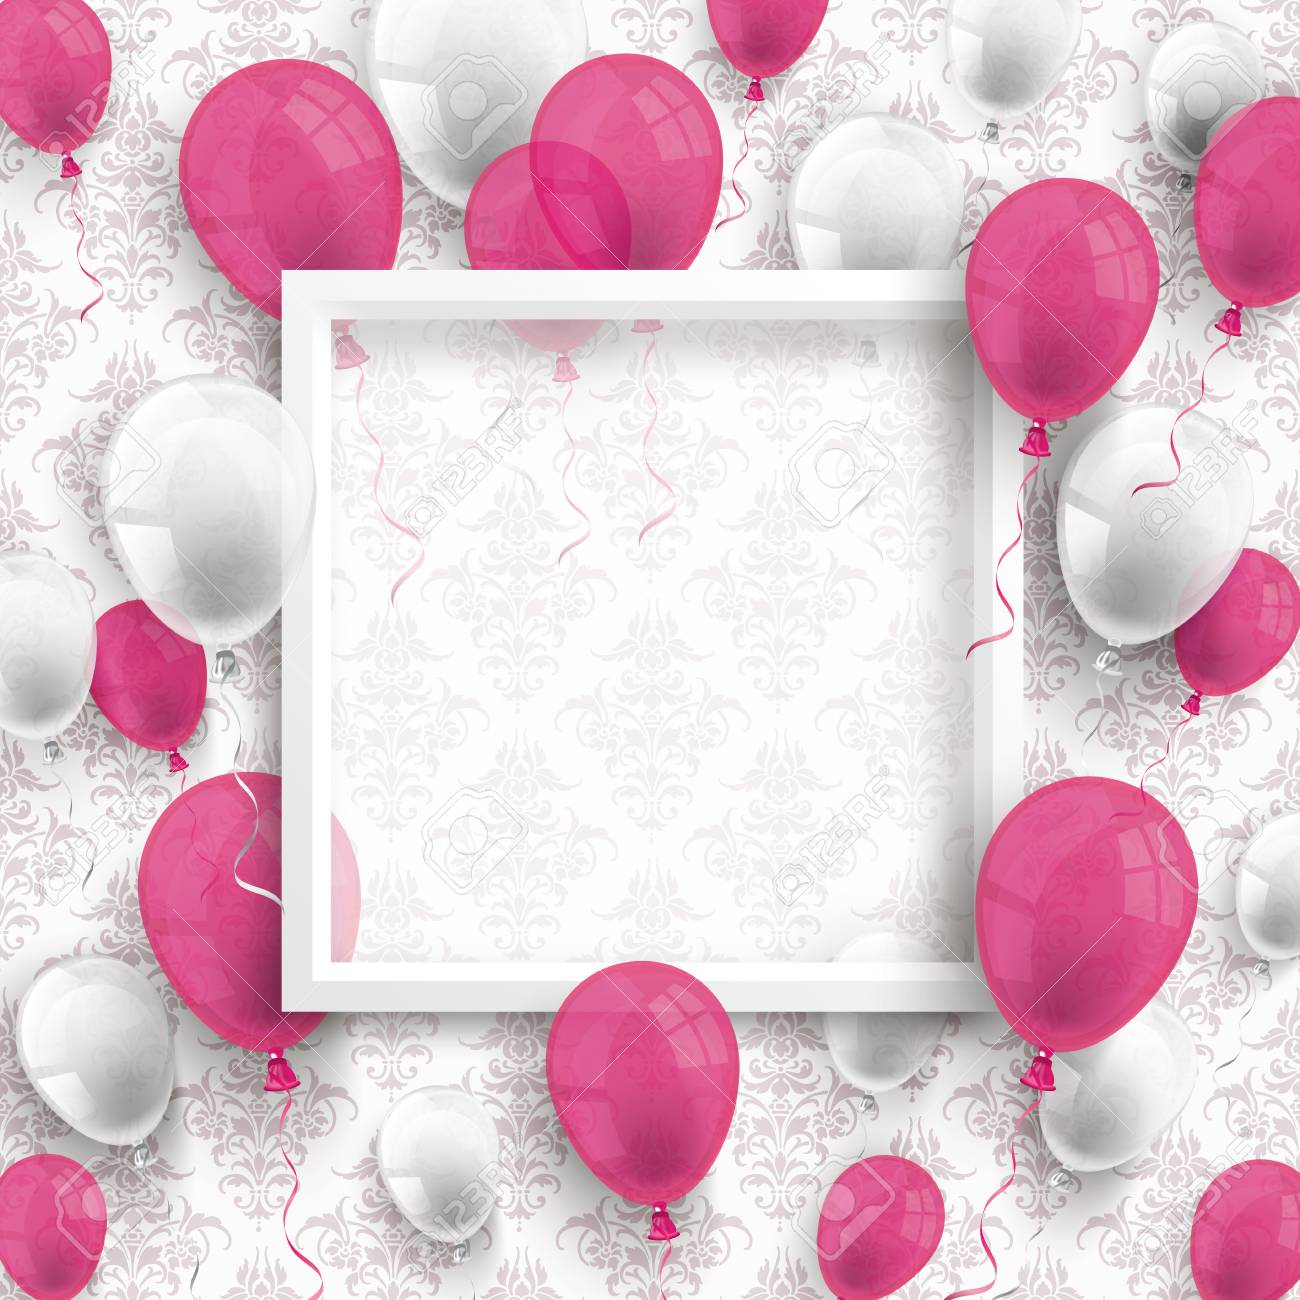 Colored Balloons With White Frame On The Wallpaper Ornaments